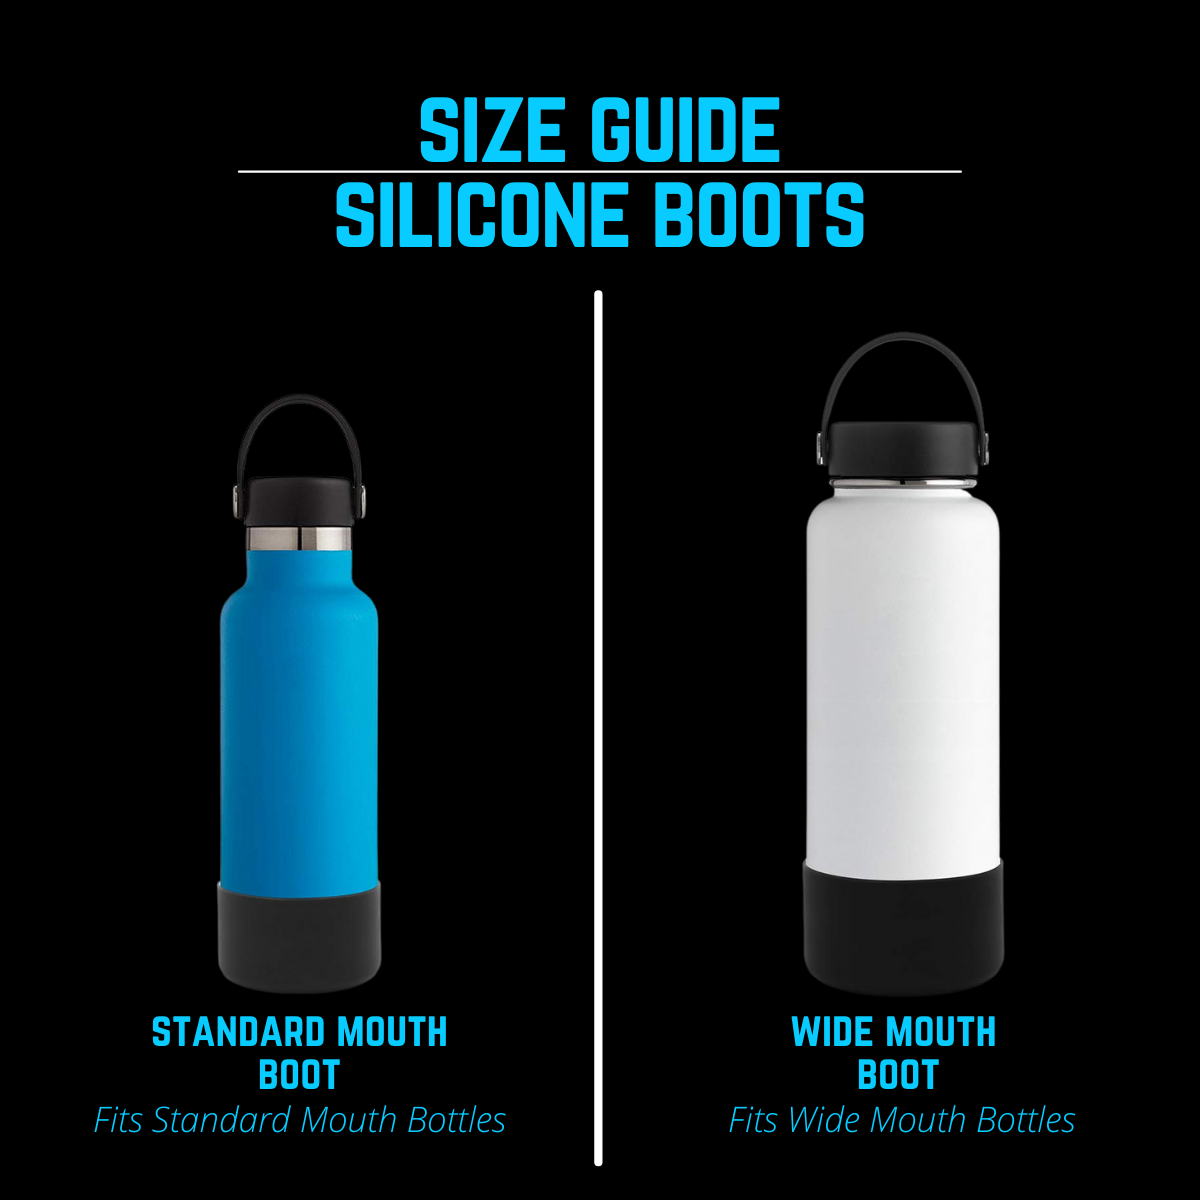 Protective Silicone Bottle Boot/Sleeve Hydro Vacuum Flask Compatible, BPA  Free Anti-Slip Bottom Cover Cap Stainless Steel Water Bottle, Dishwasher